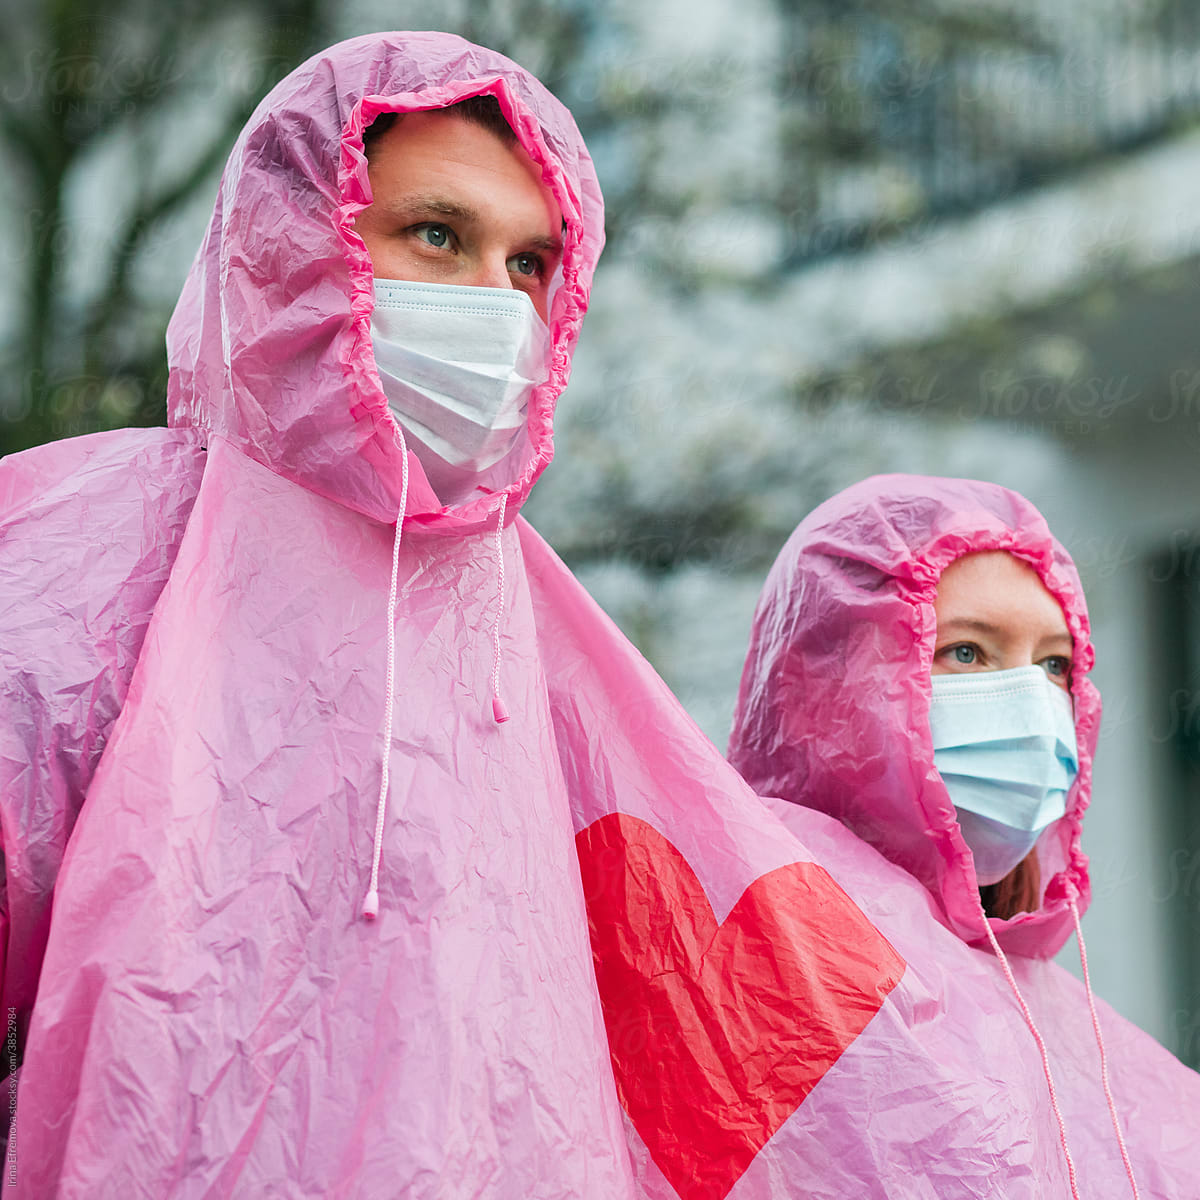 Man and woman wearing masks outside on the rain